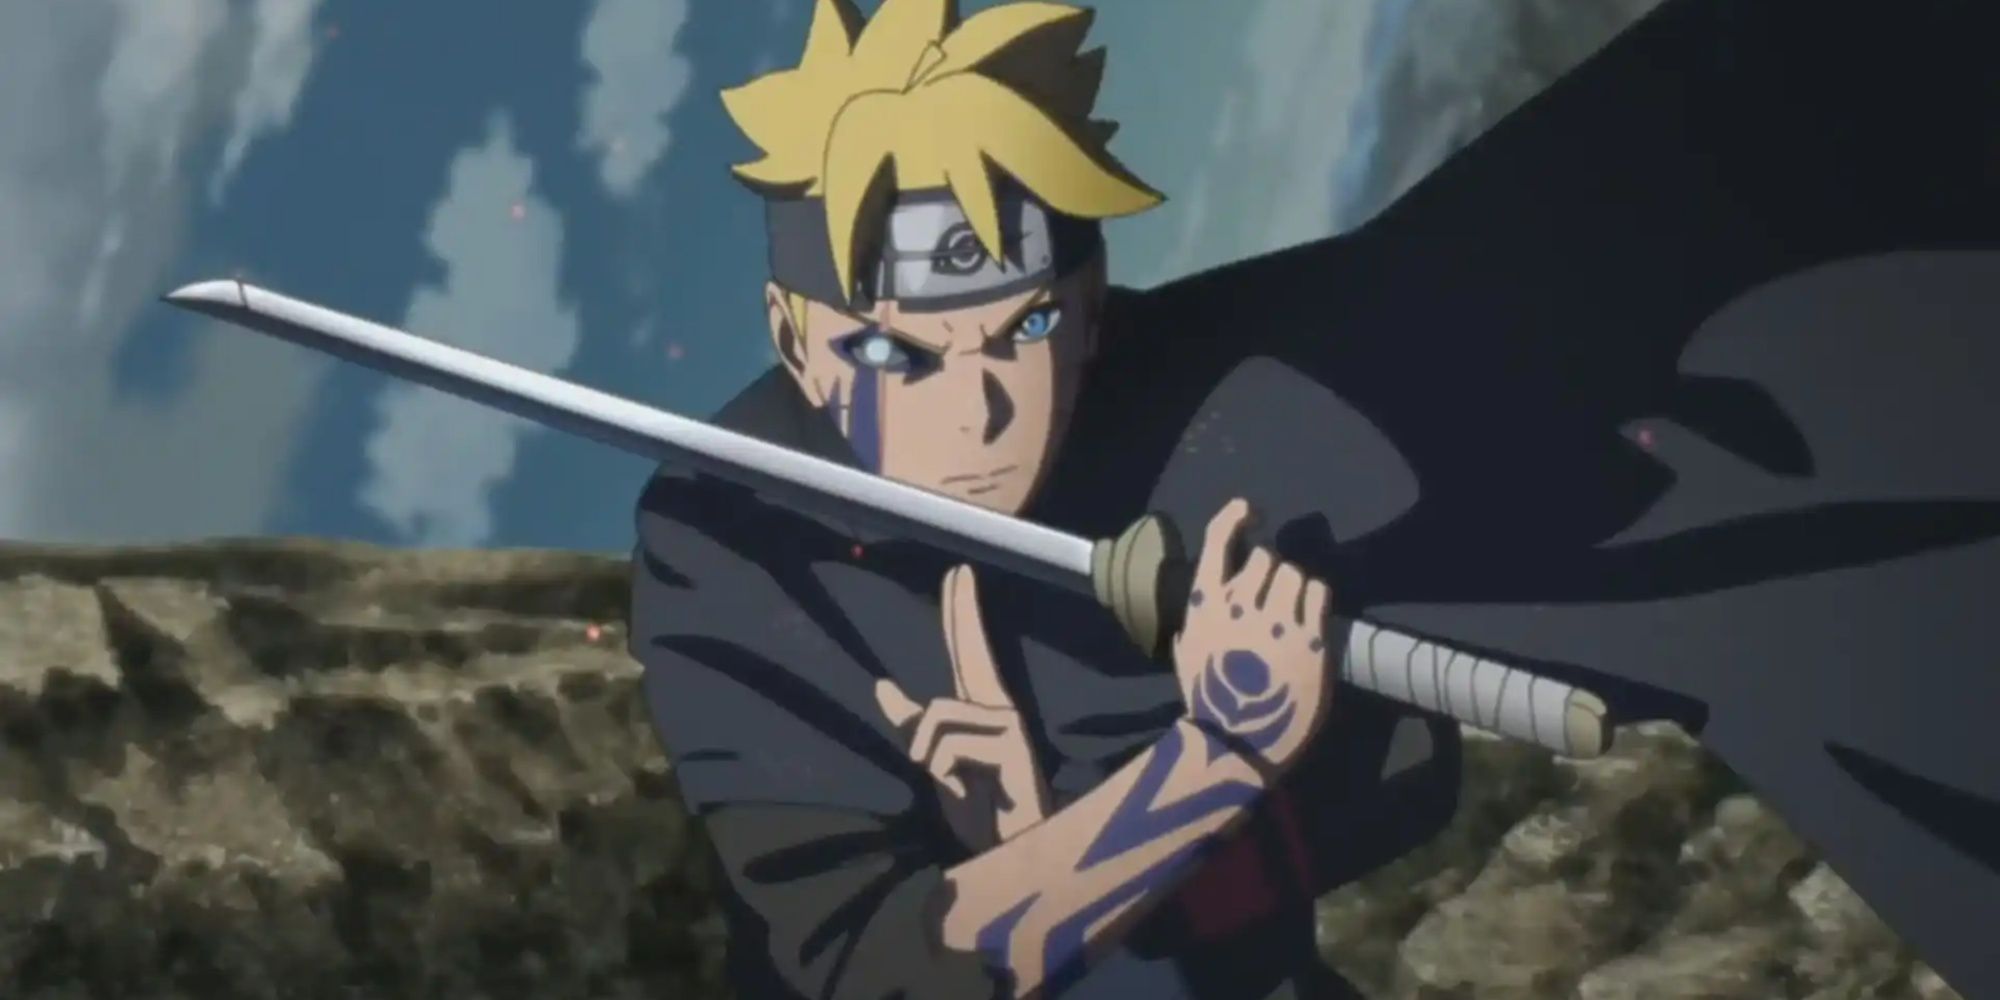 Jogan, as seen at the starting of the Boruto anime